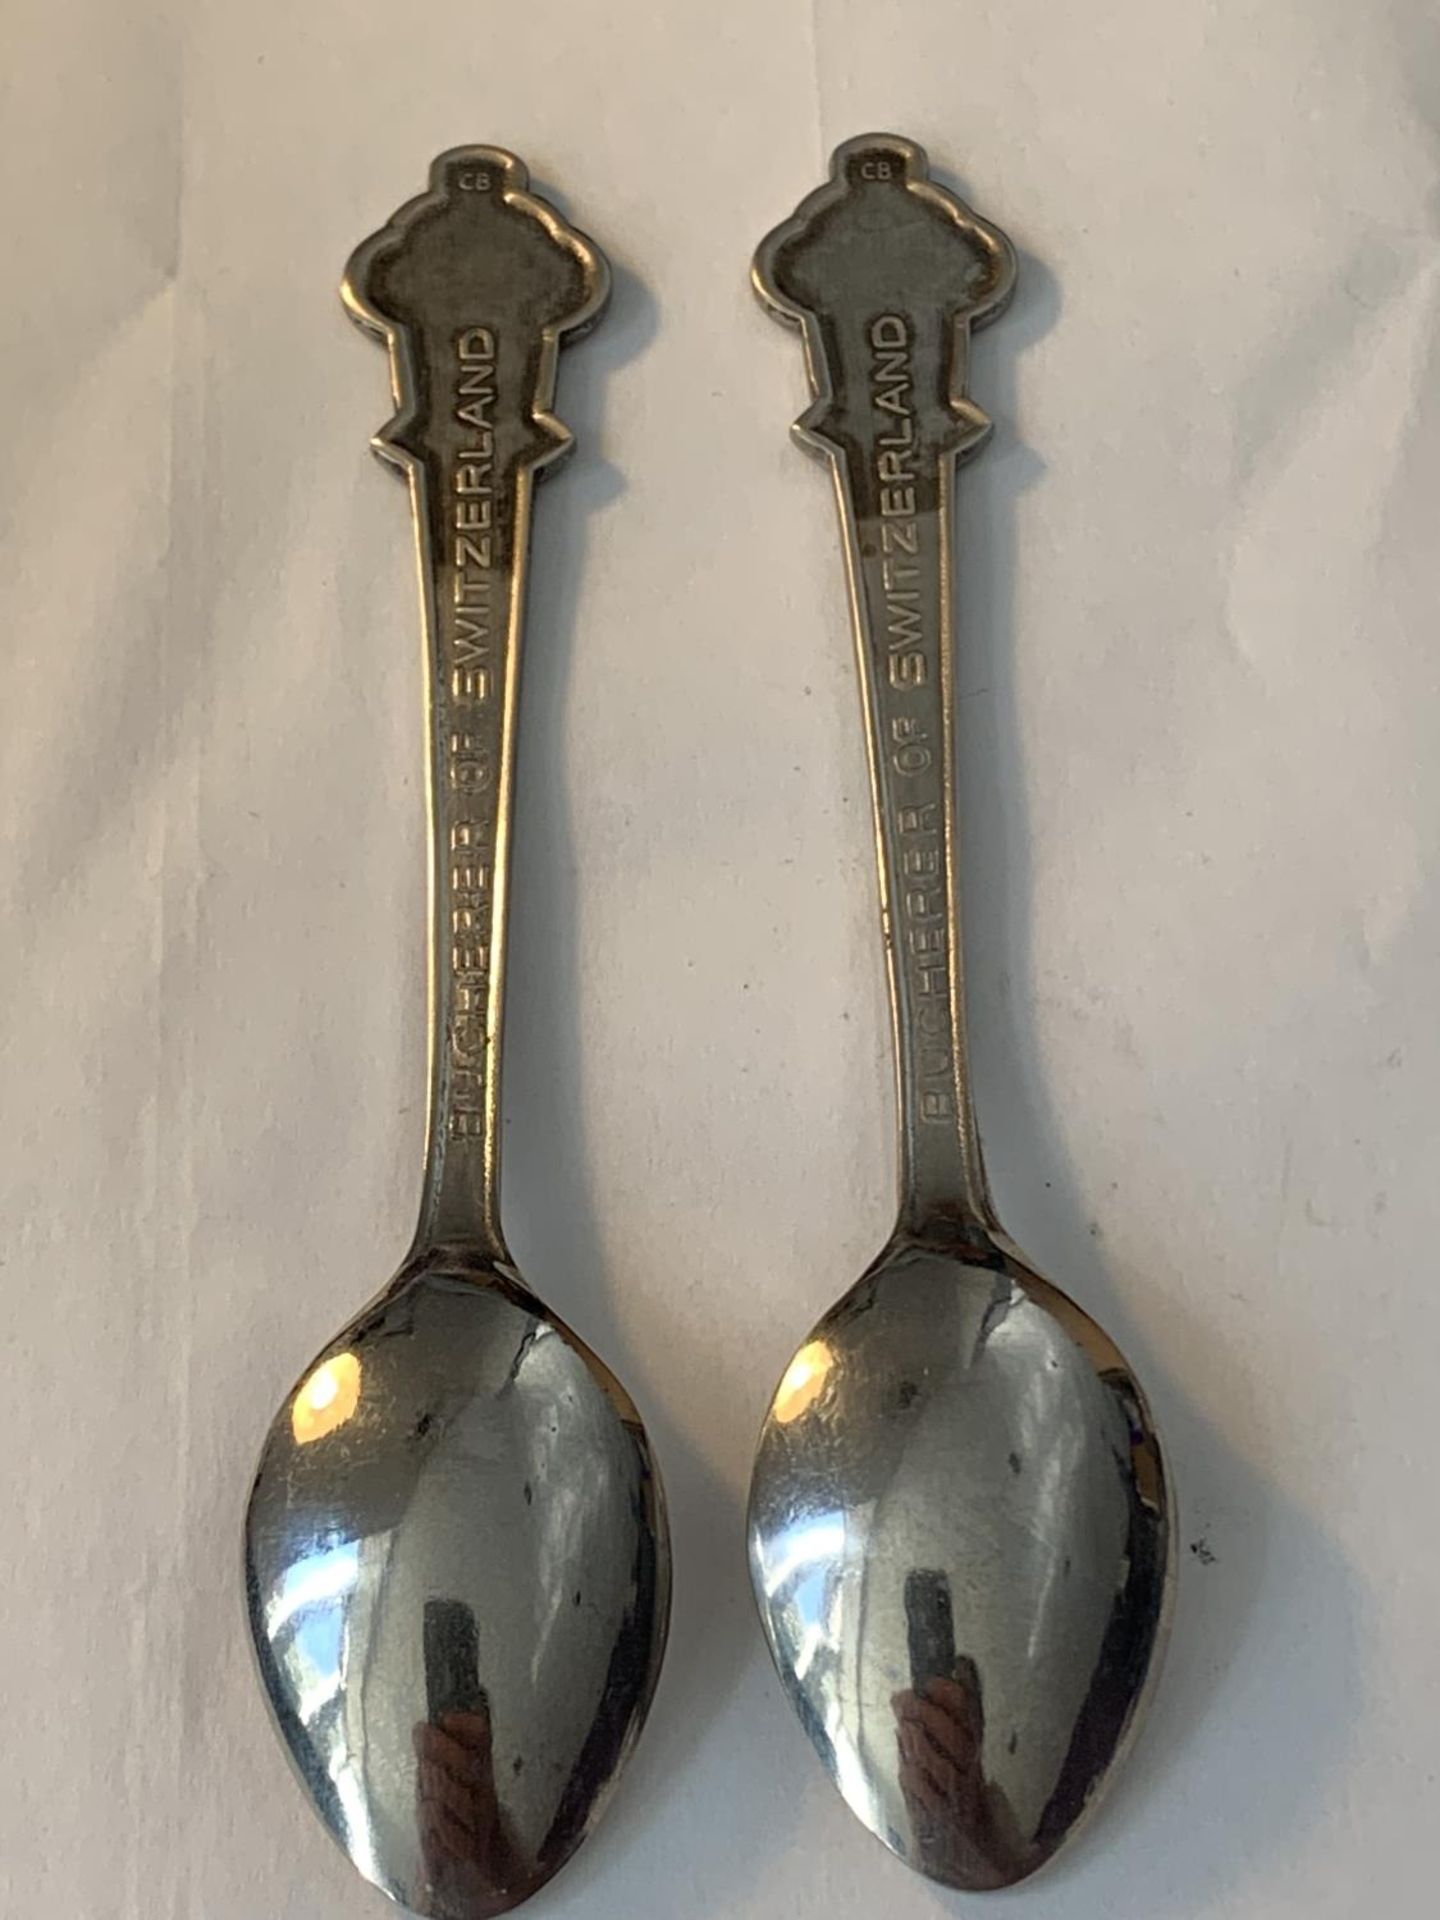 TWO VINTAGE ROLEX BUCHERER SPOONS - Image 5 of 5